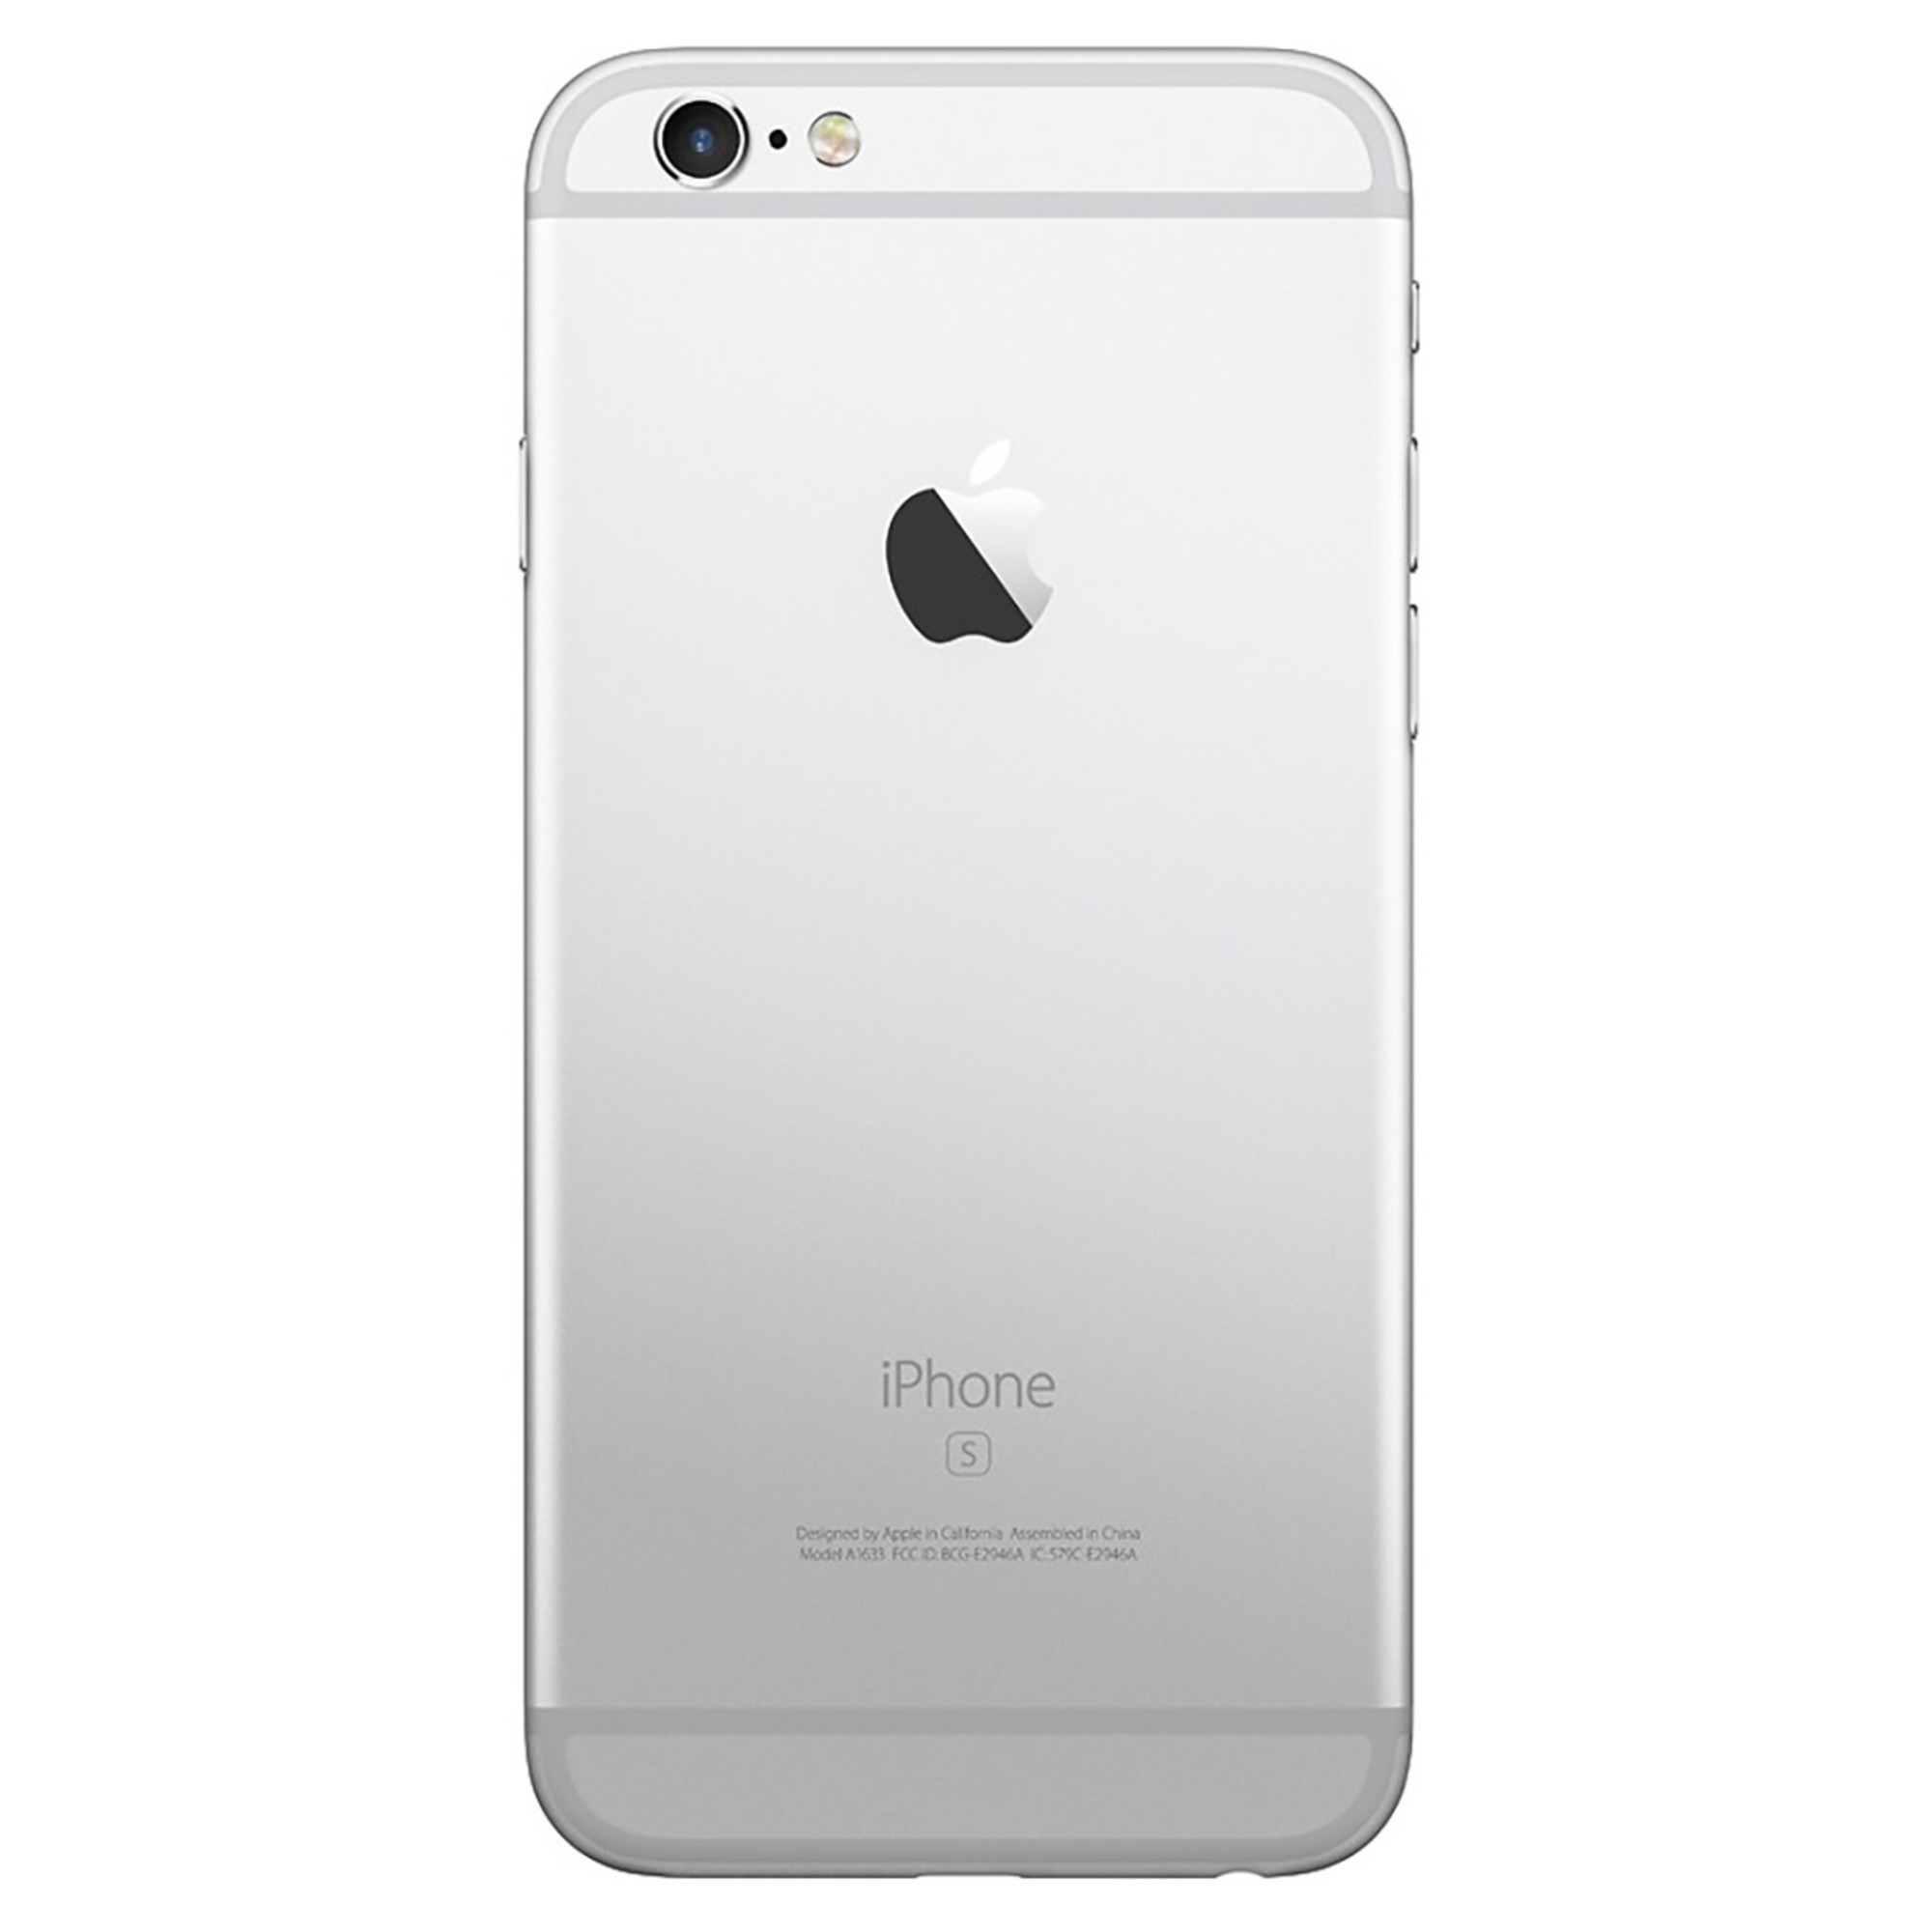 Pre-Owned Apple iPhone 6s 32GB GSM Phone - Silver + WeCare Alcohol Wipes Pack (50 Wipes) - image 3 of 6